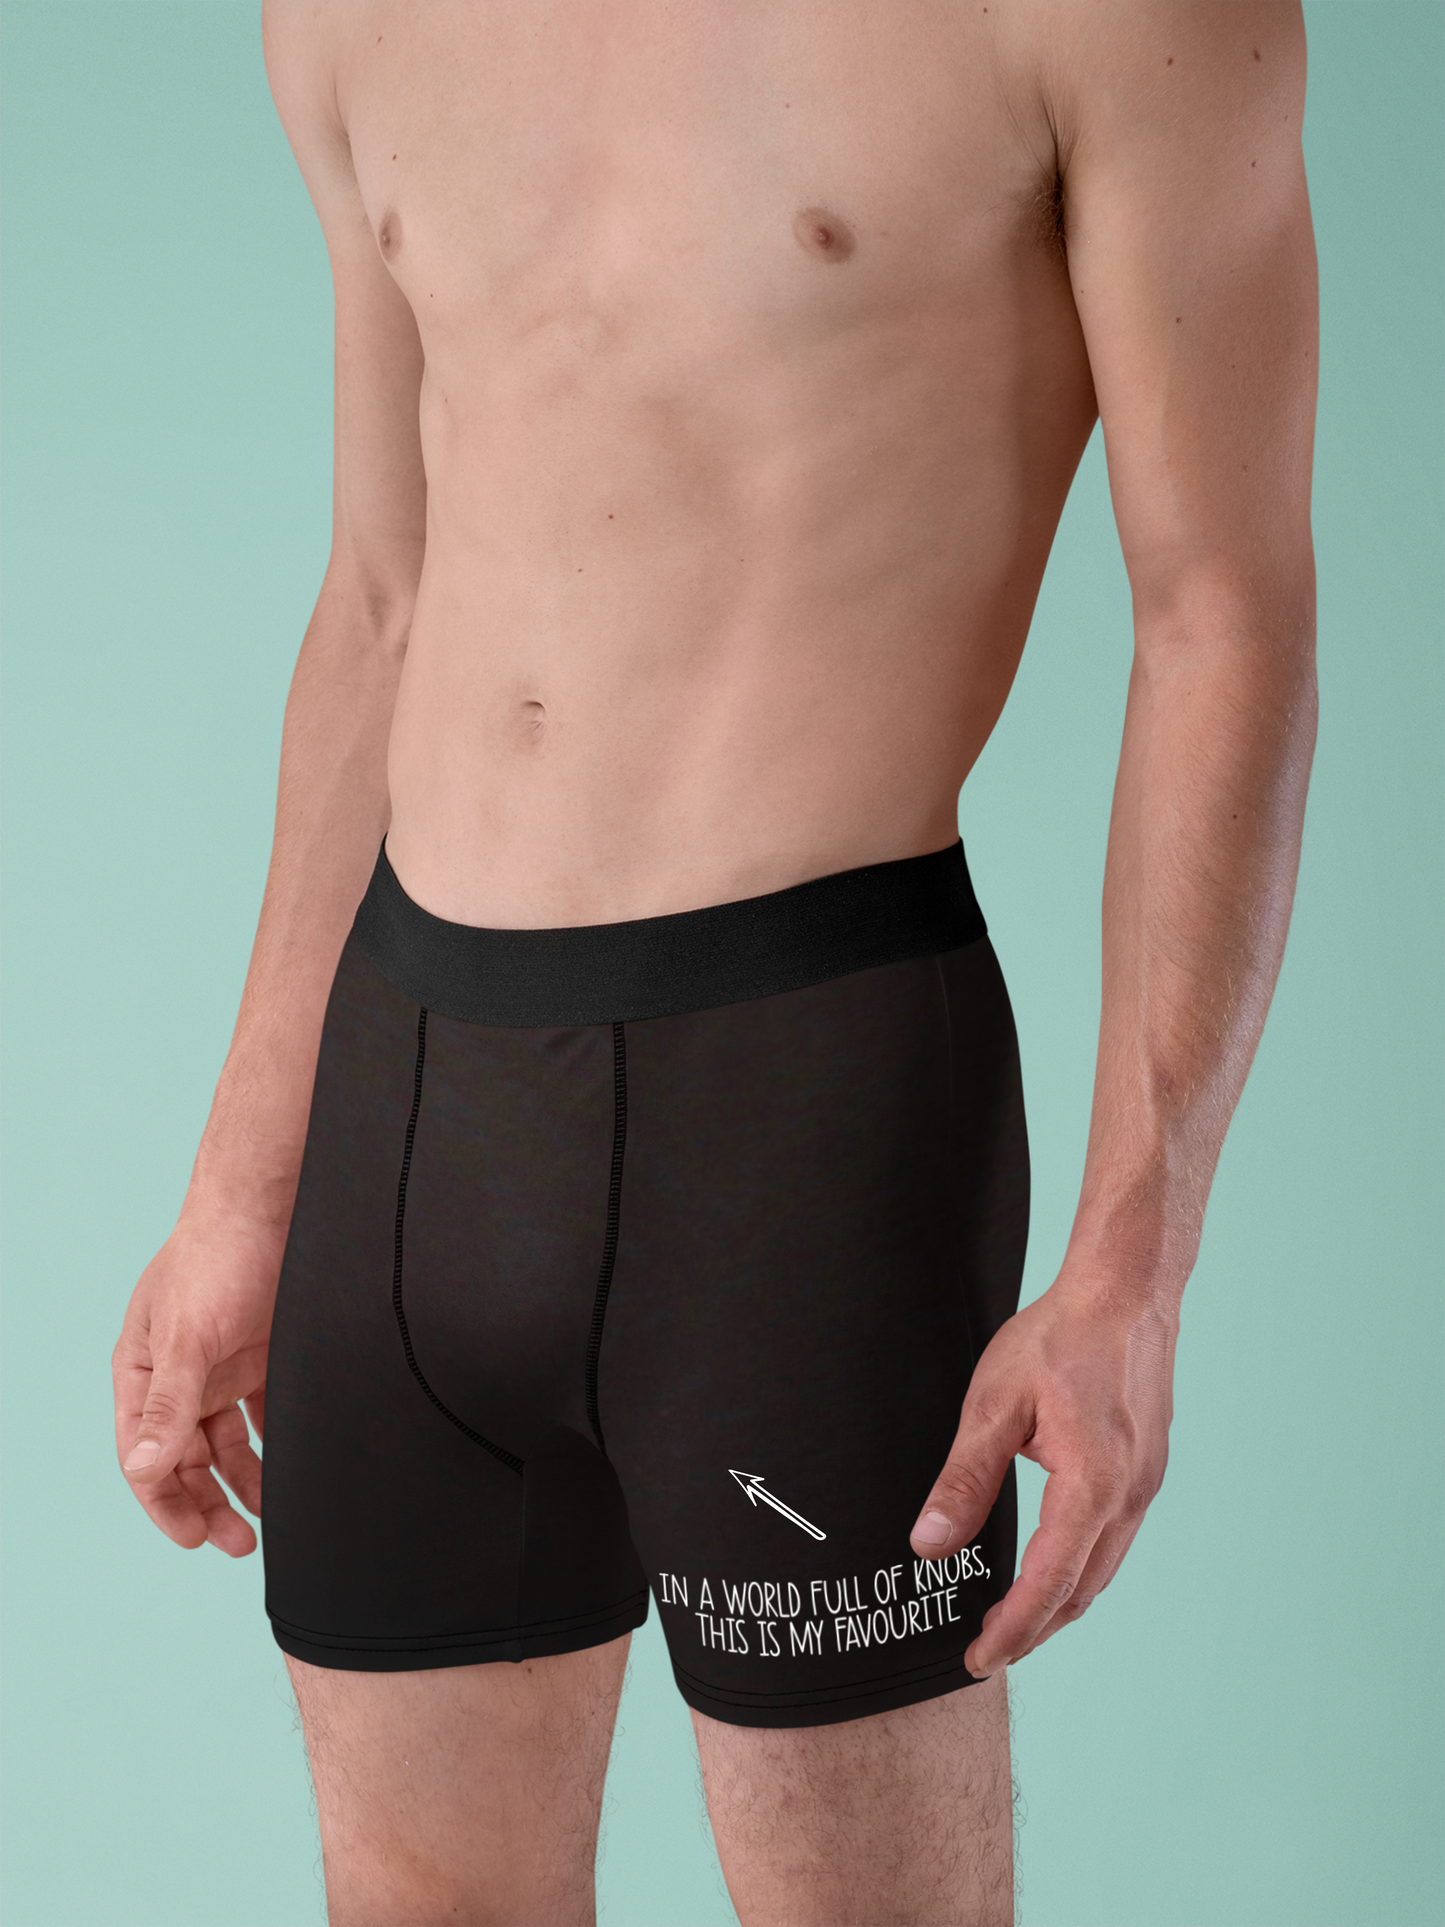 Black pair of mens boxer short pants with a white funny quote to the bottom of the left leg. It reads 'in a world full of knobs, this is my favourite' with an arrow pointing to the crotch area'.